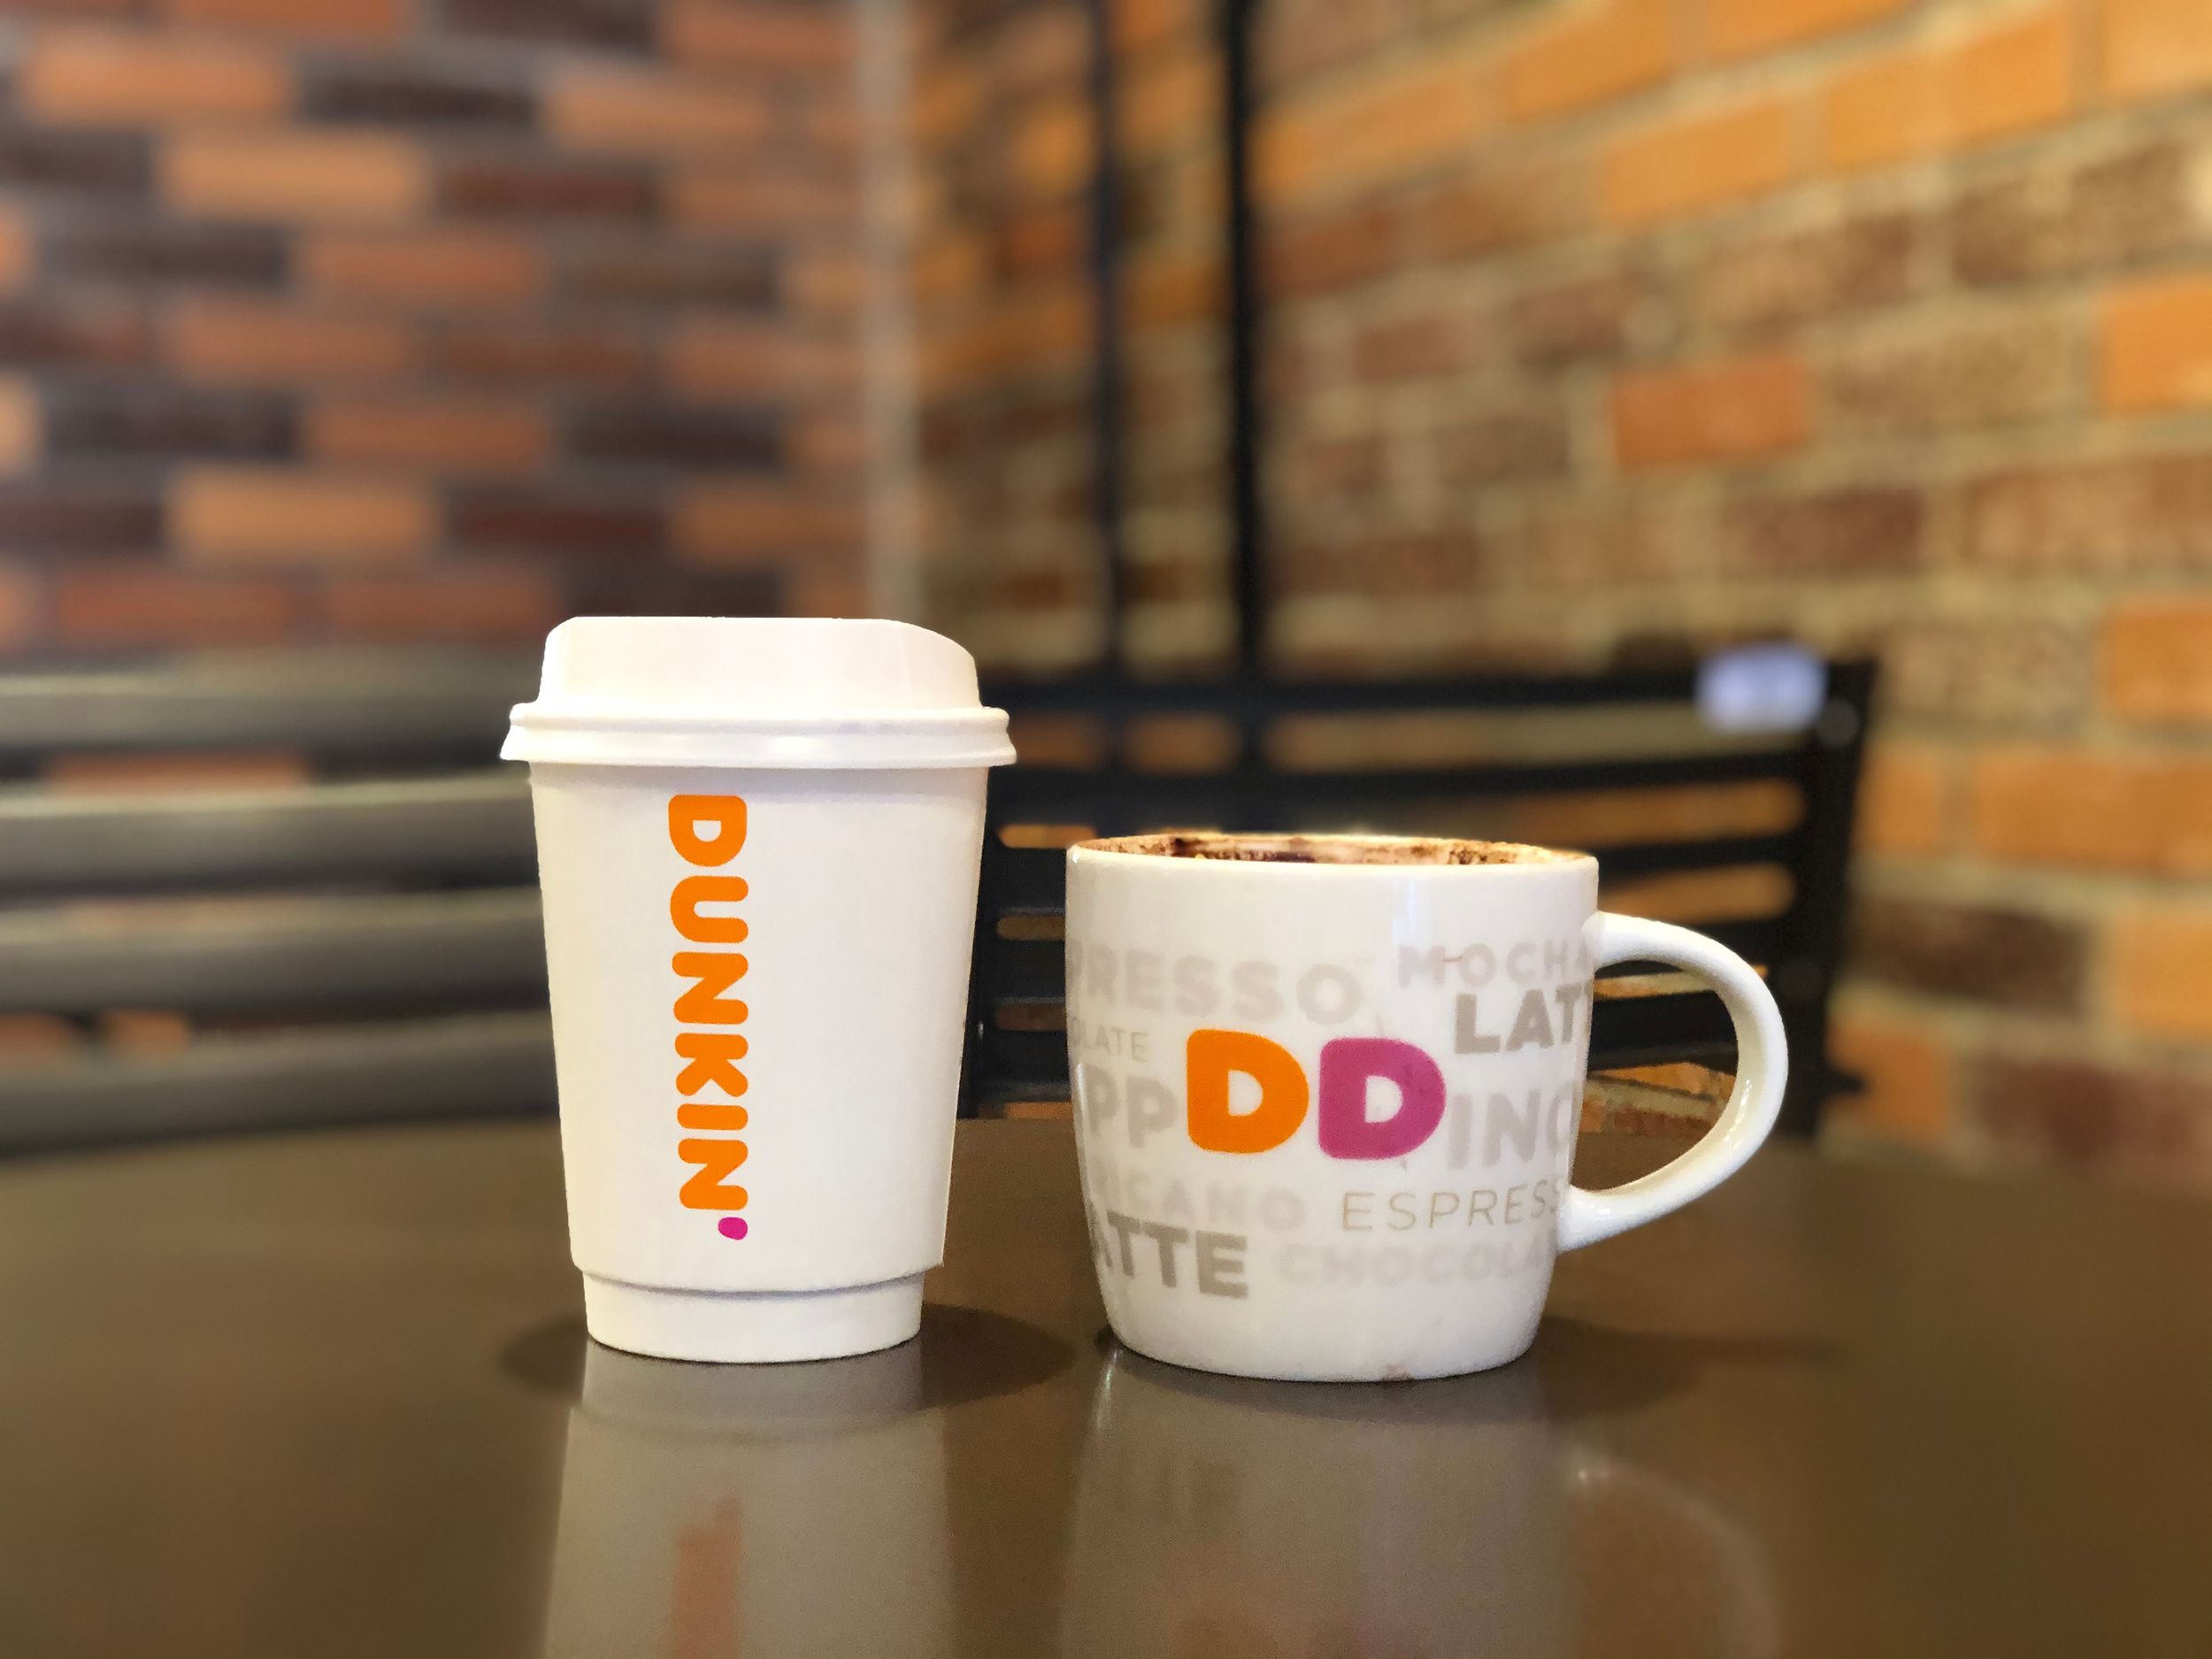 <p>We know some fast baristas, but no single person could serve enough cups of Dunkin’ to satisfy the world’s demand. According to Dunkin’, they serve approximately 2 billion cups of coffee every year. That’s equivalent to 3,600 cups per hour or 60 cups every second!</p><p><a href='https://www.msn.com/en-us/community/channel/vid-cj9pqbr0vn9in2b6ddcd8sfgpfq6x6utp44fssrv6mc2gtybw0us'>Follow us on MSN to see more of our exclusive lifestyle content.</a></p>